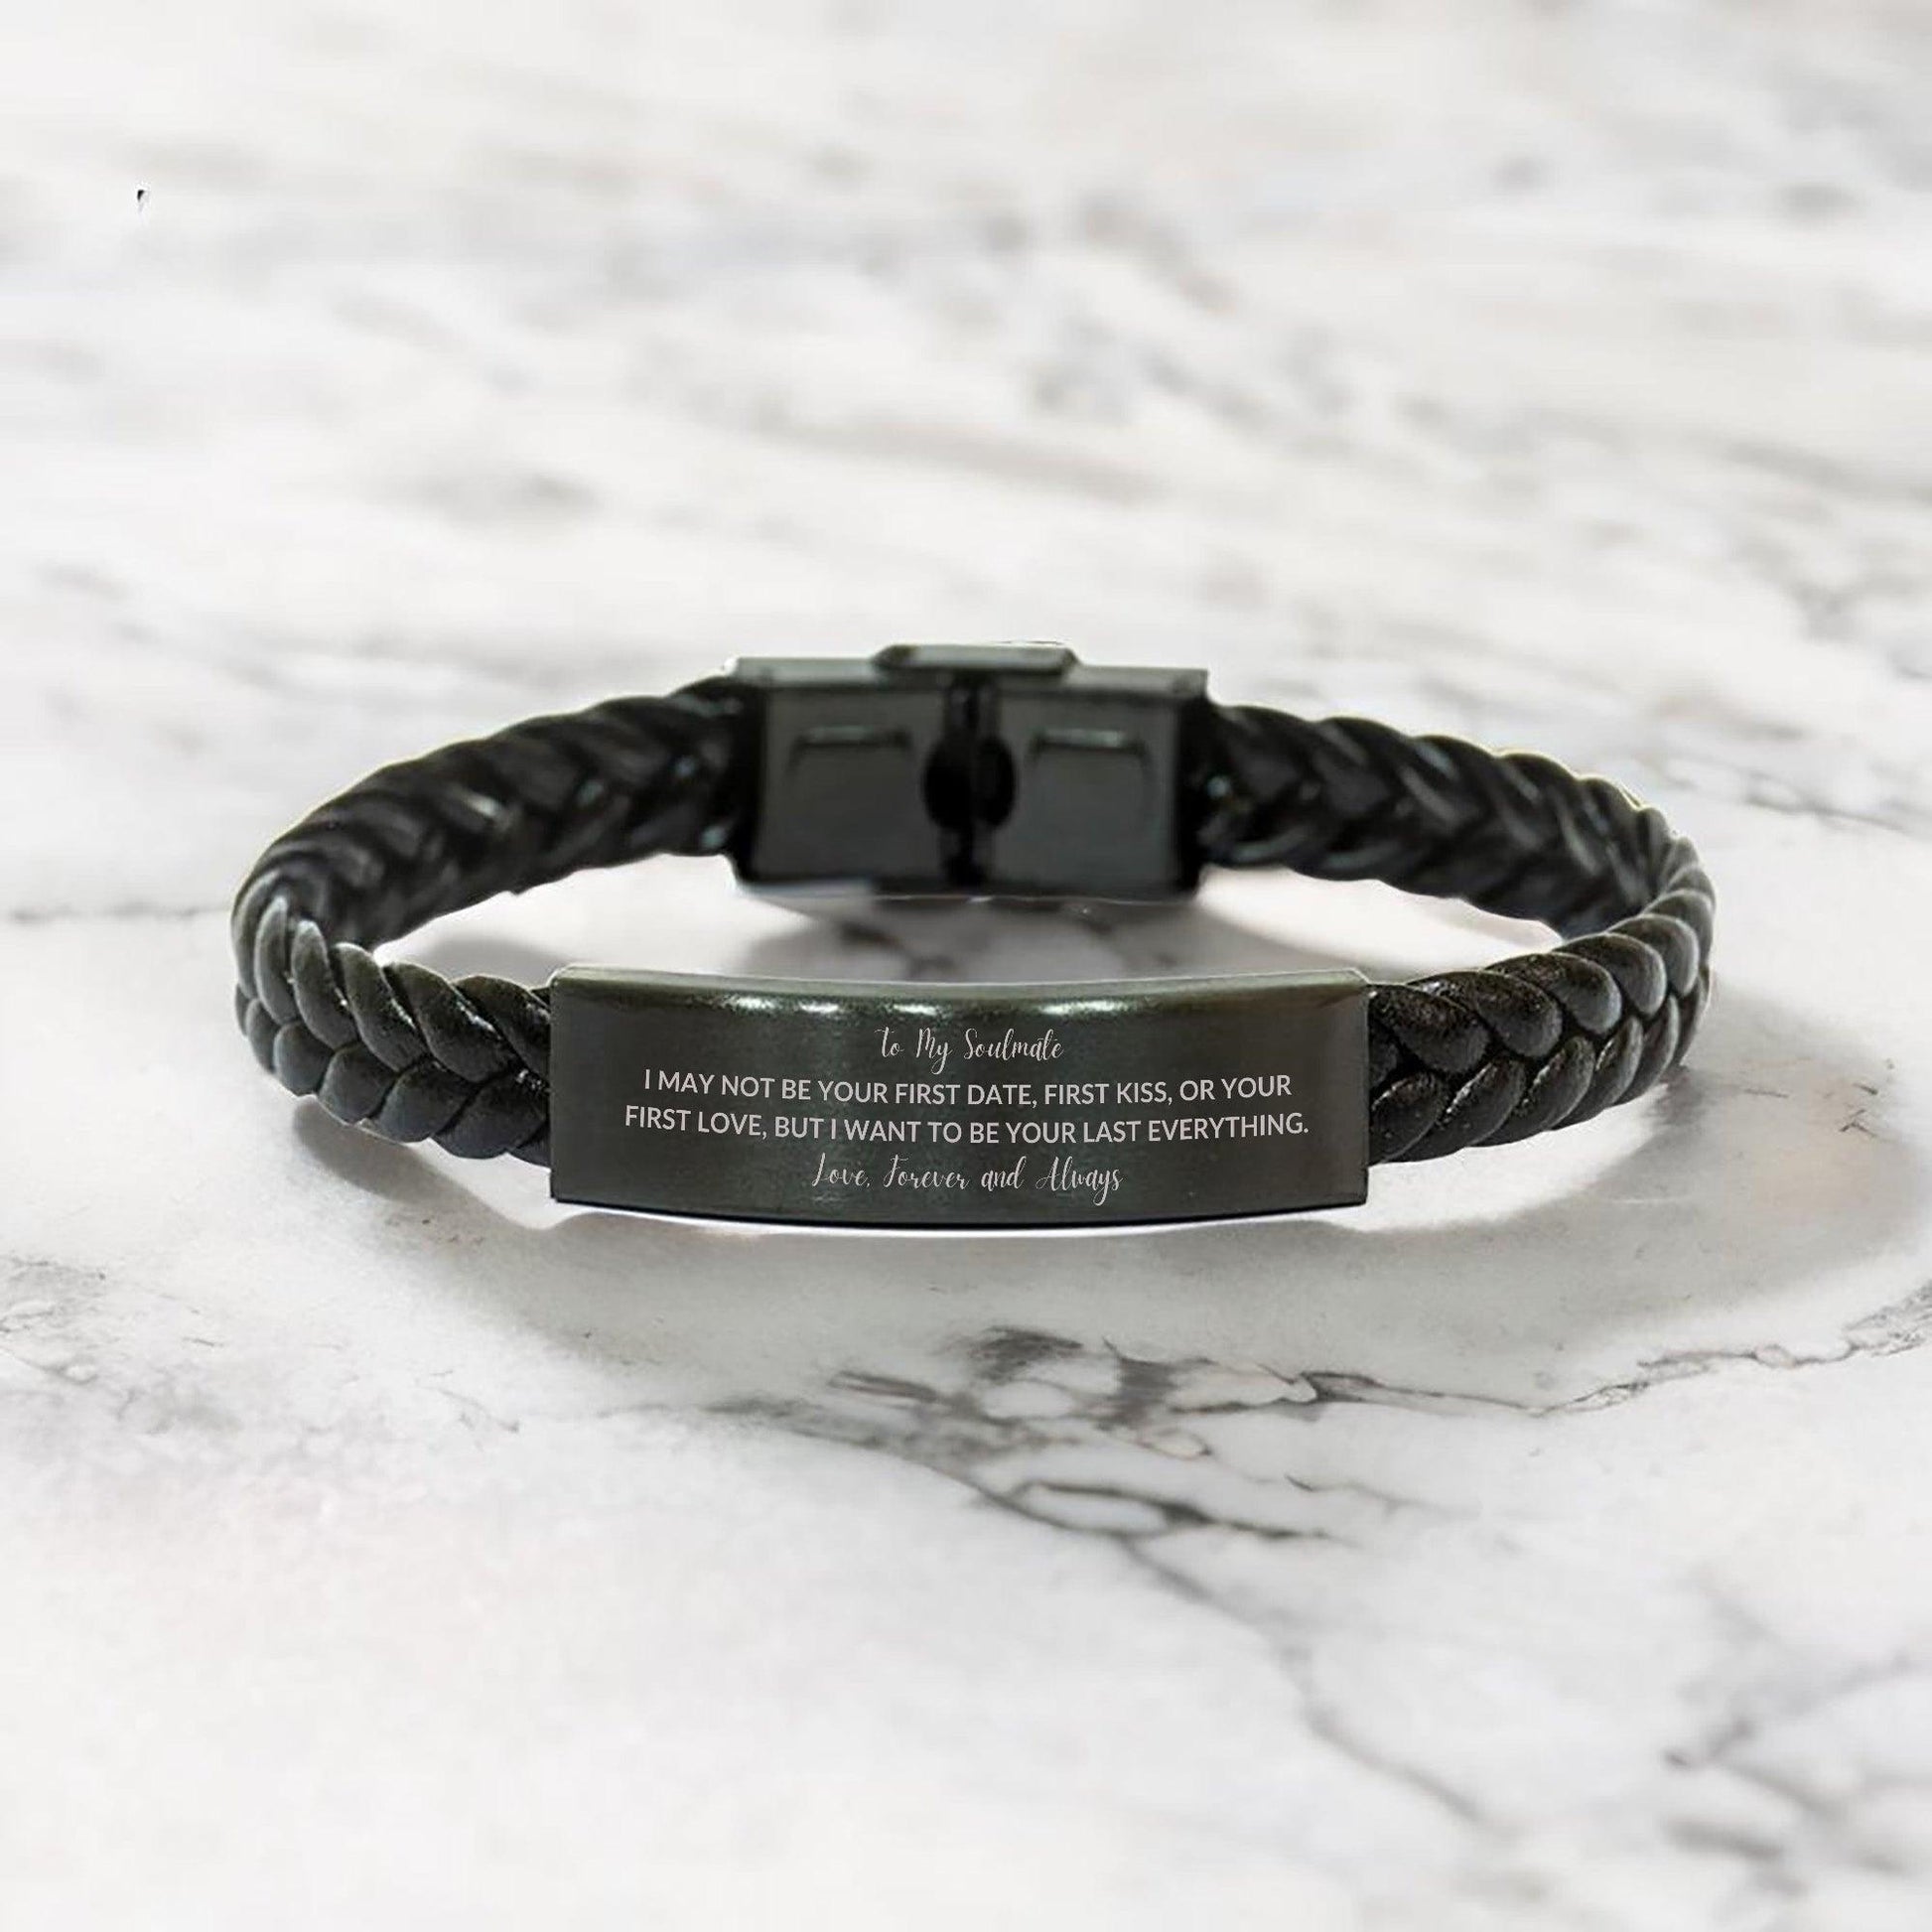 Romantic Soulmate Braided Leather Engraved Bracelet - I Want to be Your Last Everything - Birthday, Christmas Holiday, Valentine Gifts - Mallard Moon Gift Shop